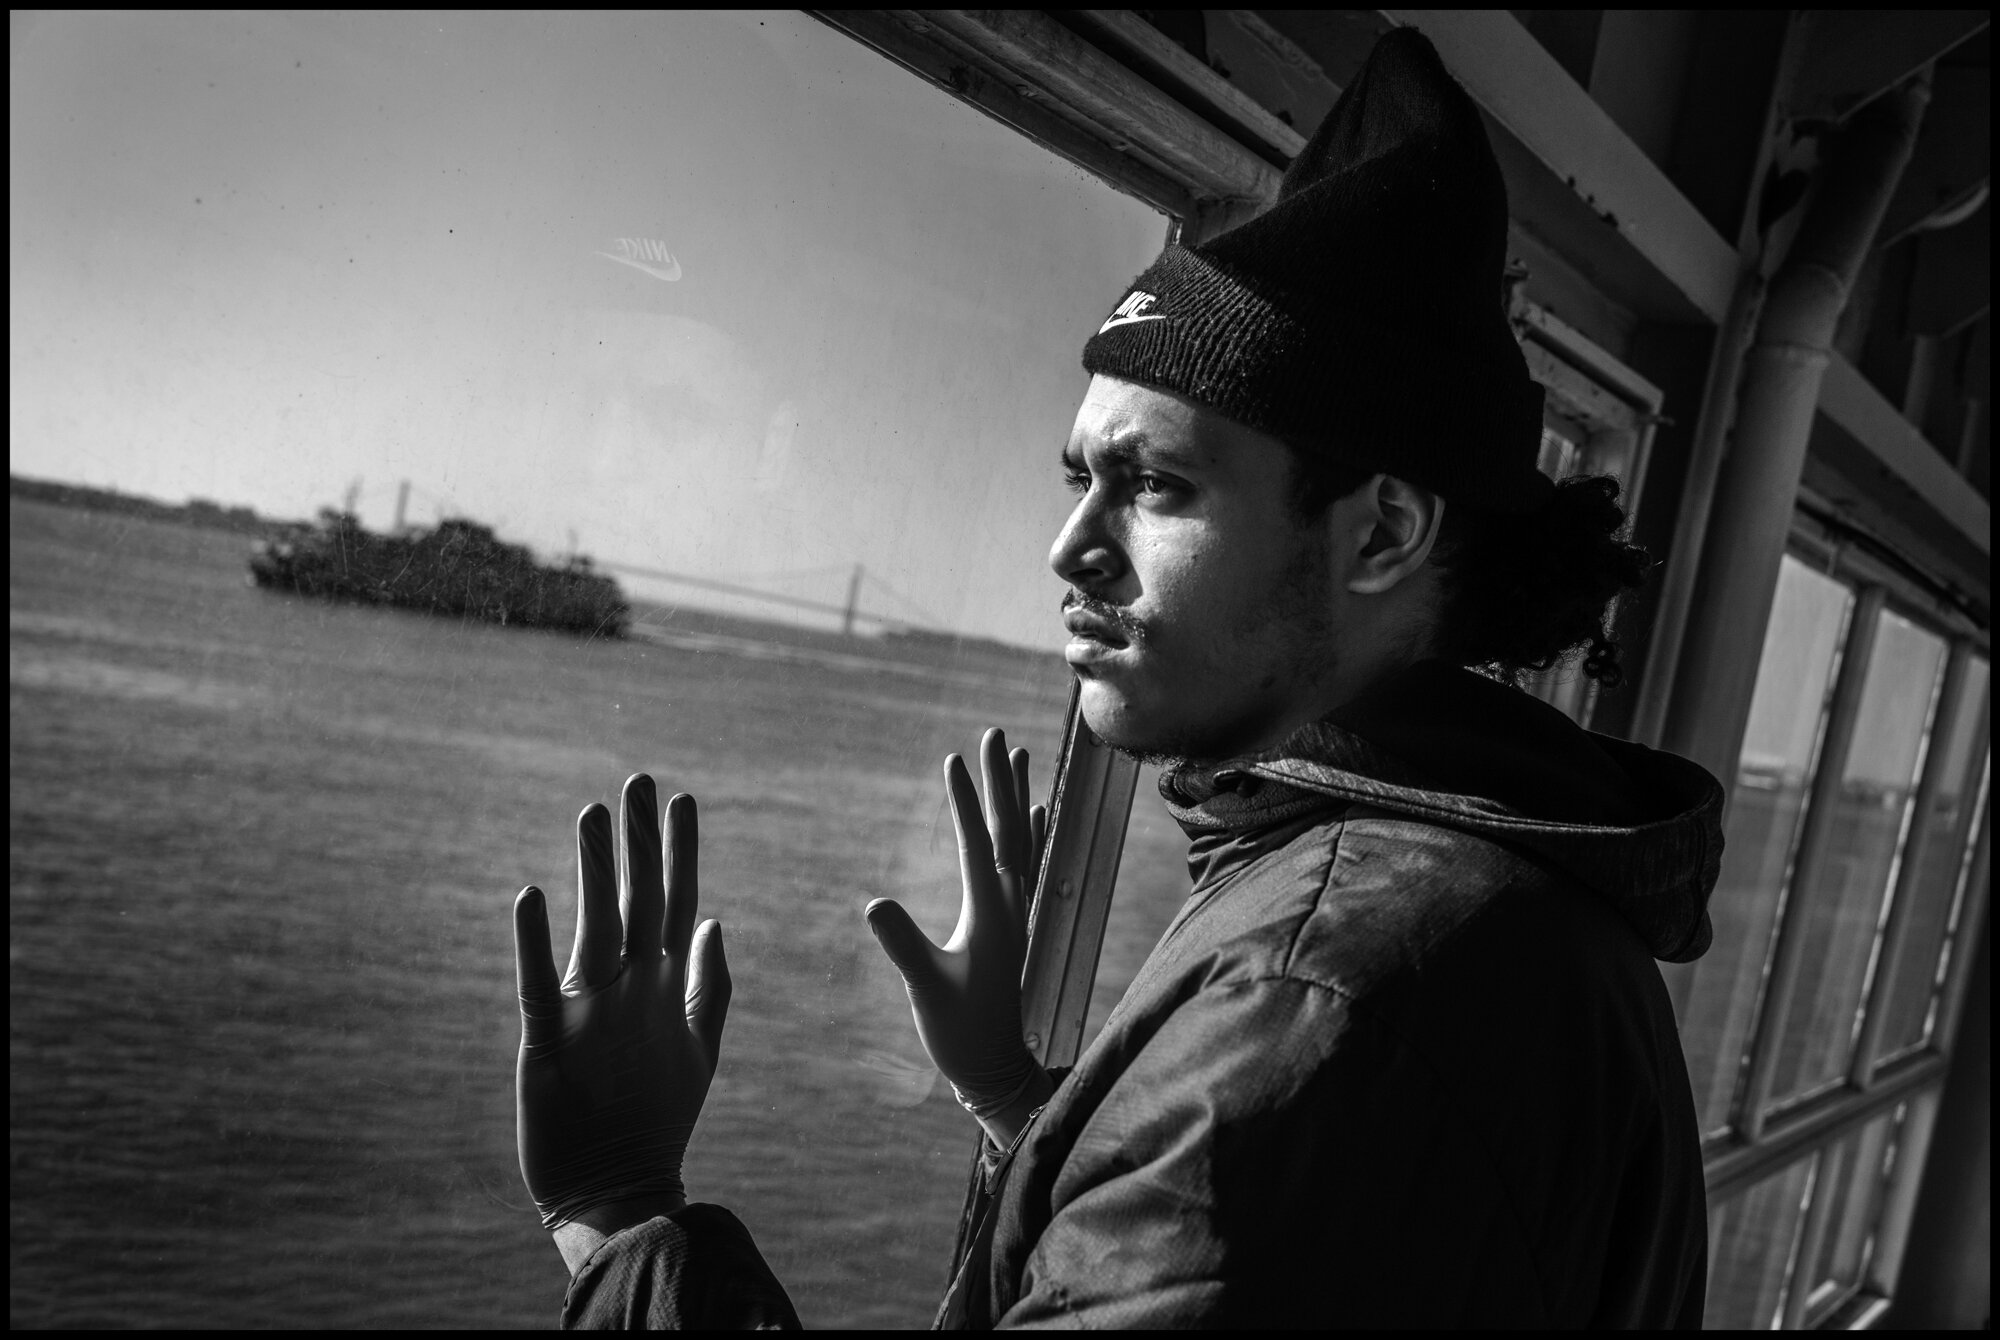  Pedro, 21, grew up in Spanish Harlem. He rides the Staten Island Ferry to visit his girlfriend. I asked him how he was doing and he told me, “It’s kind of rough-I was looking for a job, and this is not a good time.”  March 26, 2020. © Peter Turnley.